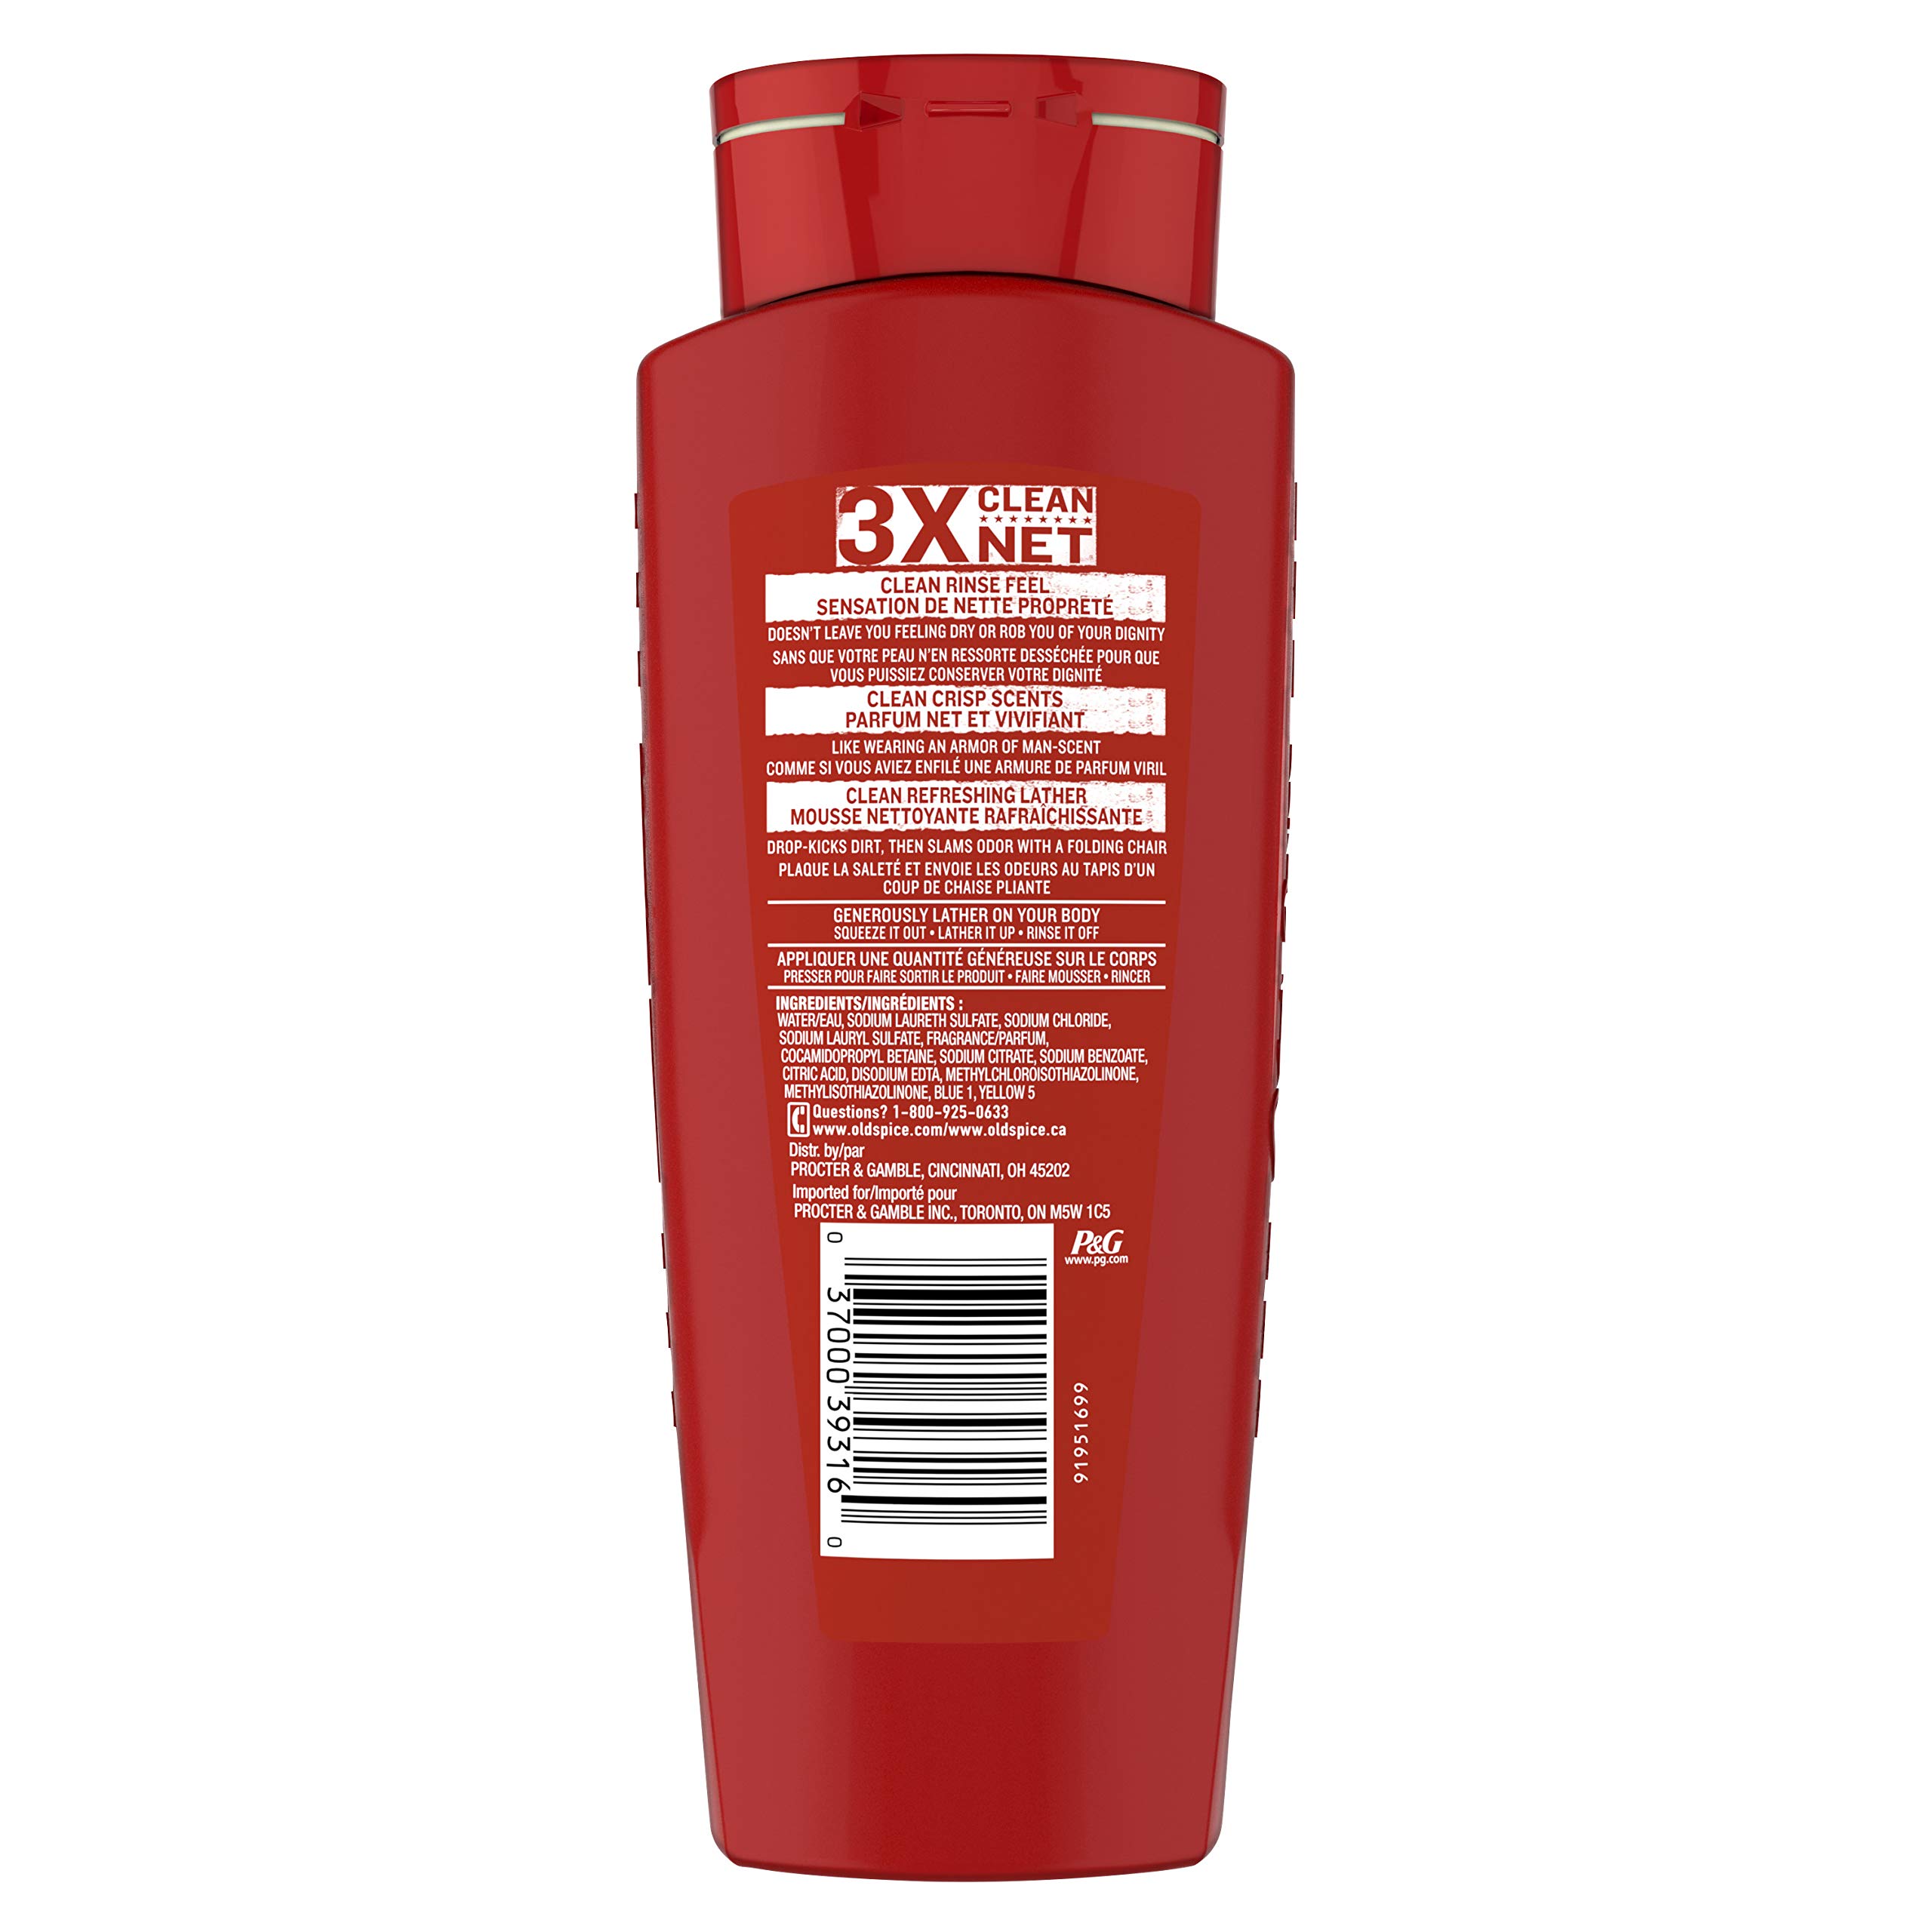 Old Spice High Endurance Pure Sport Scent Body Wash for Men, 18 oz